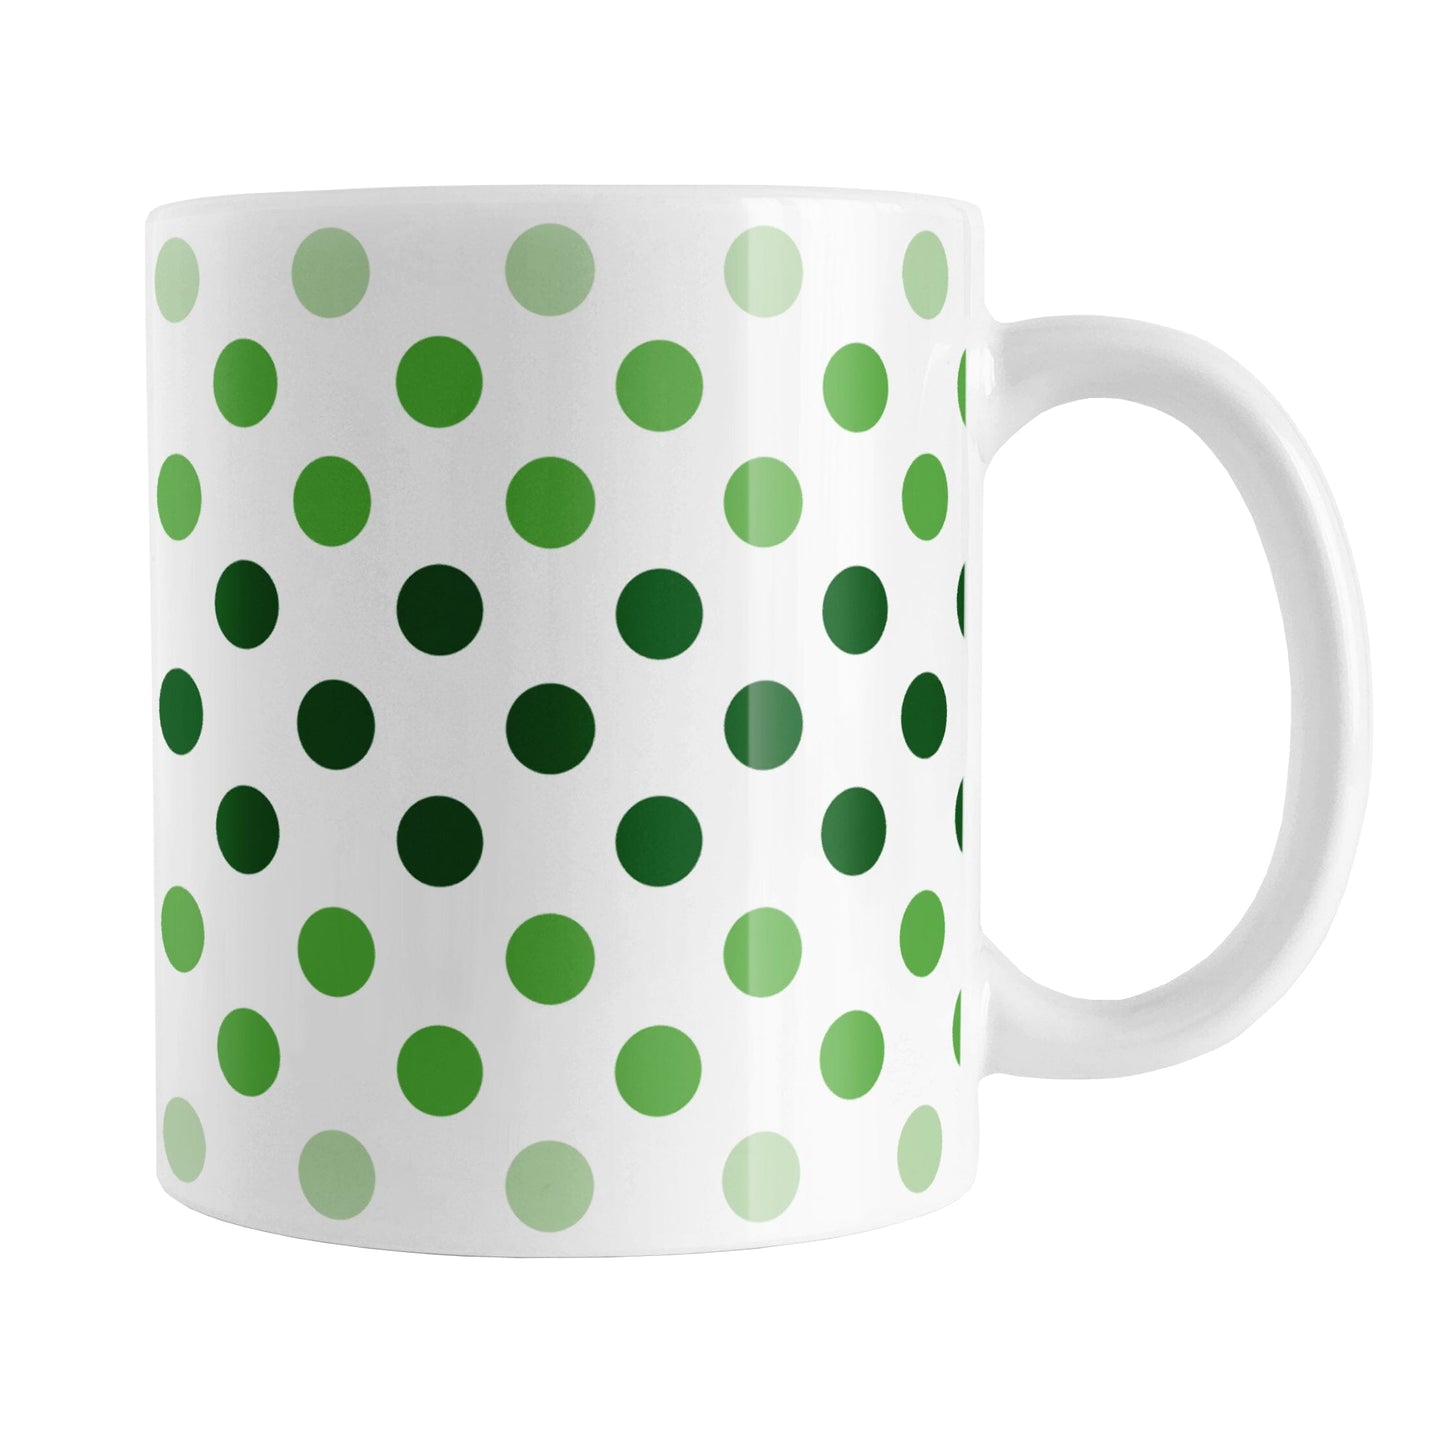 Polka Dots in Green Mug (11oz) at Amy's Coffee Mugs. A ceramic coffee mug designed with polka dots in different shades of green, with the darker green color across the middle and the lighter green along the top and bottom, in a pattern that wraps around the mug to the handle. 